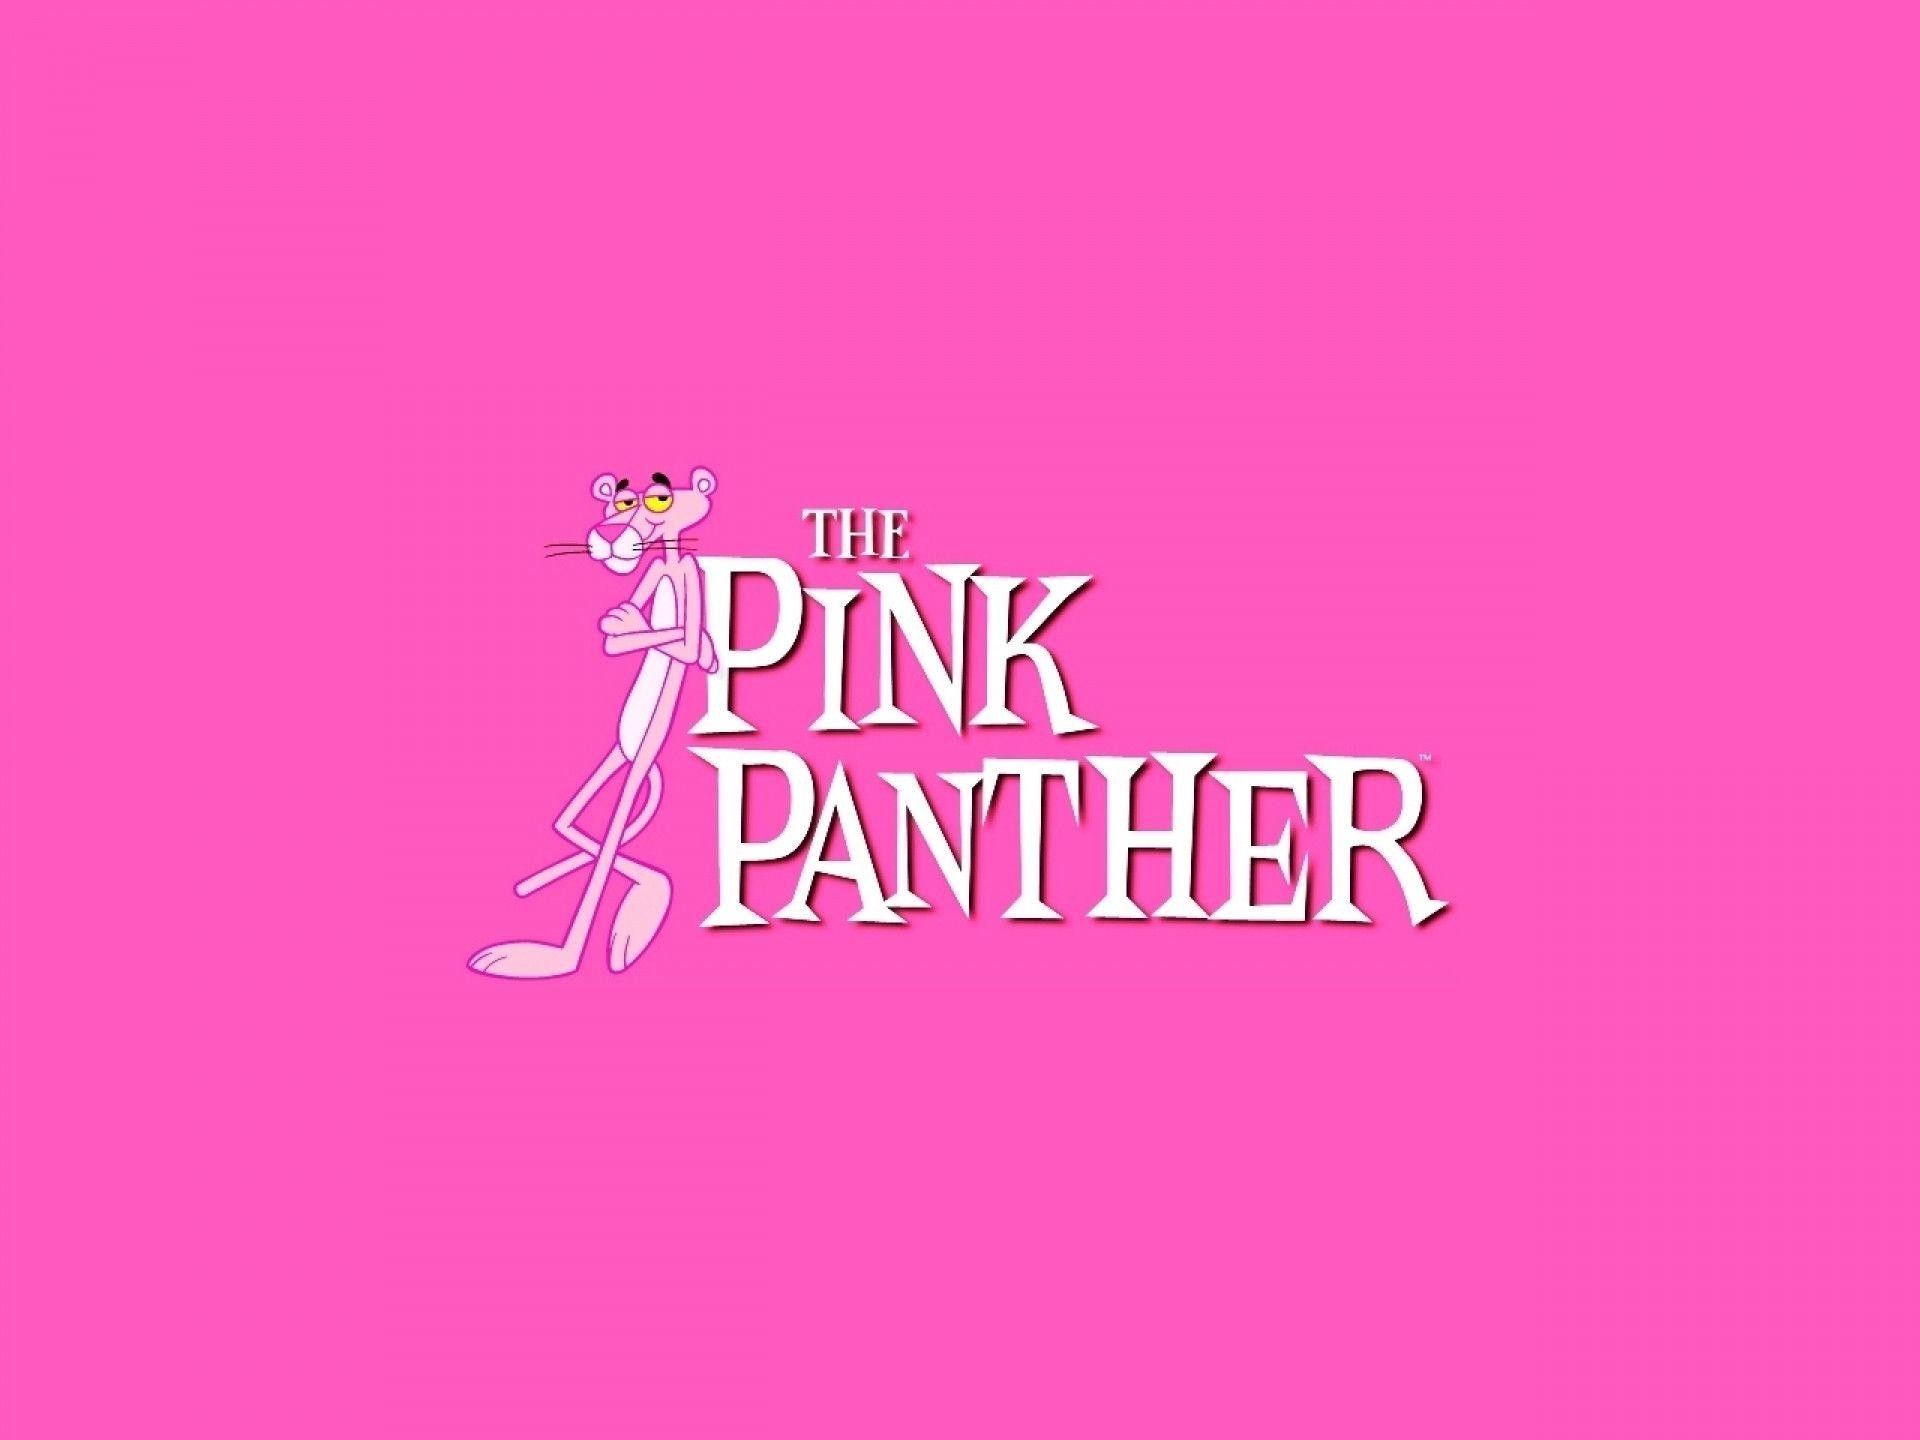 The Pink Panther Show - Season 1 - Episode 2: The Pink Panther in 